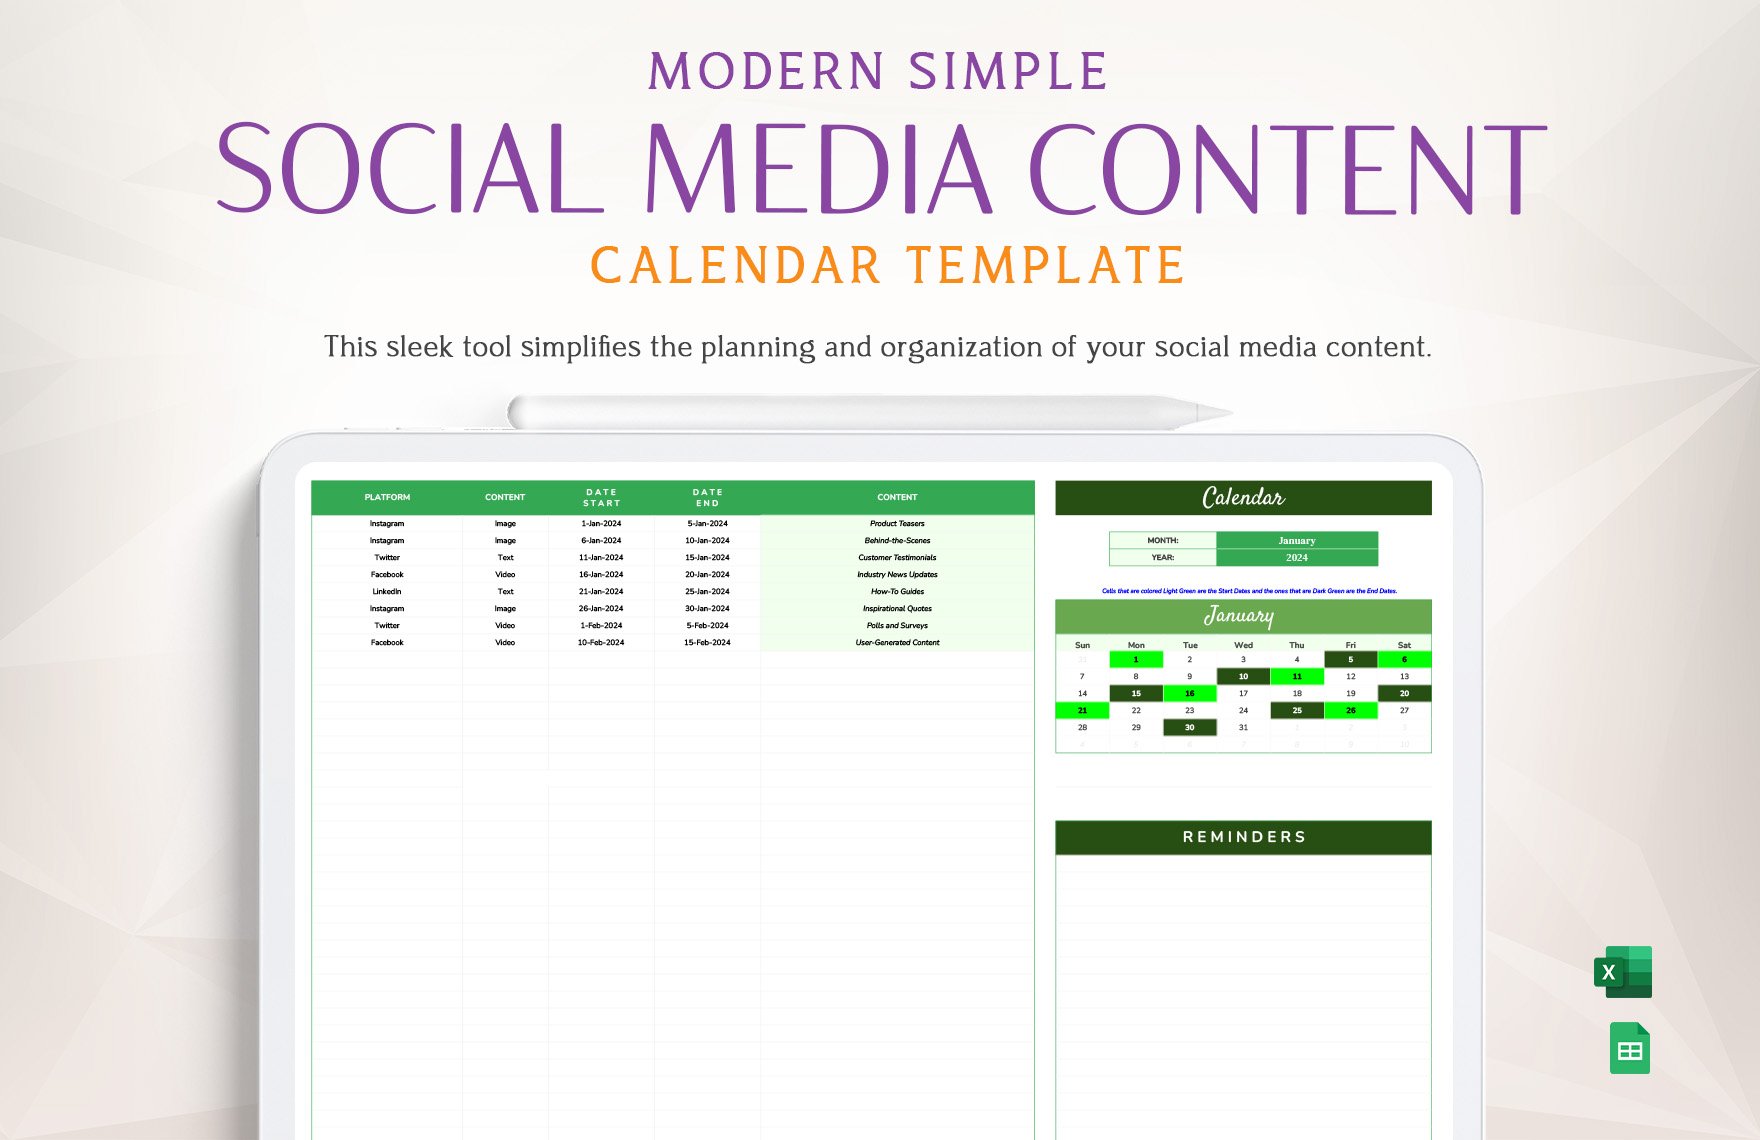 Modern Simple Social Media Content Calendar Template in Excel, Google Sheets